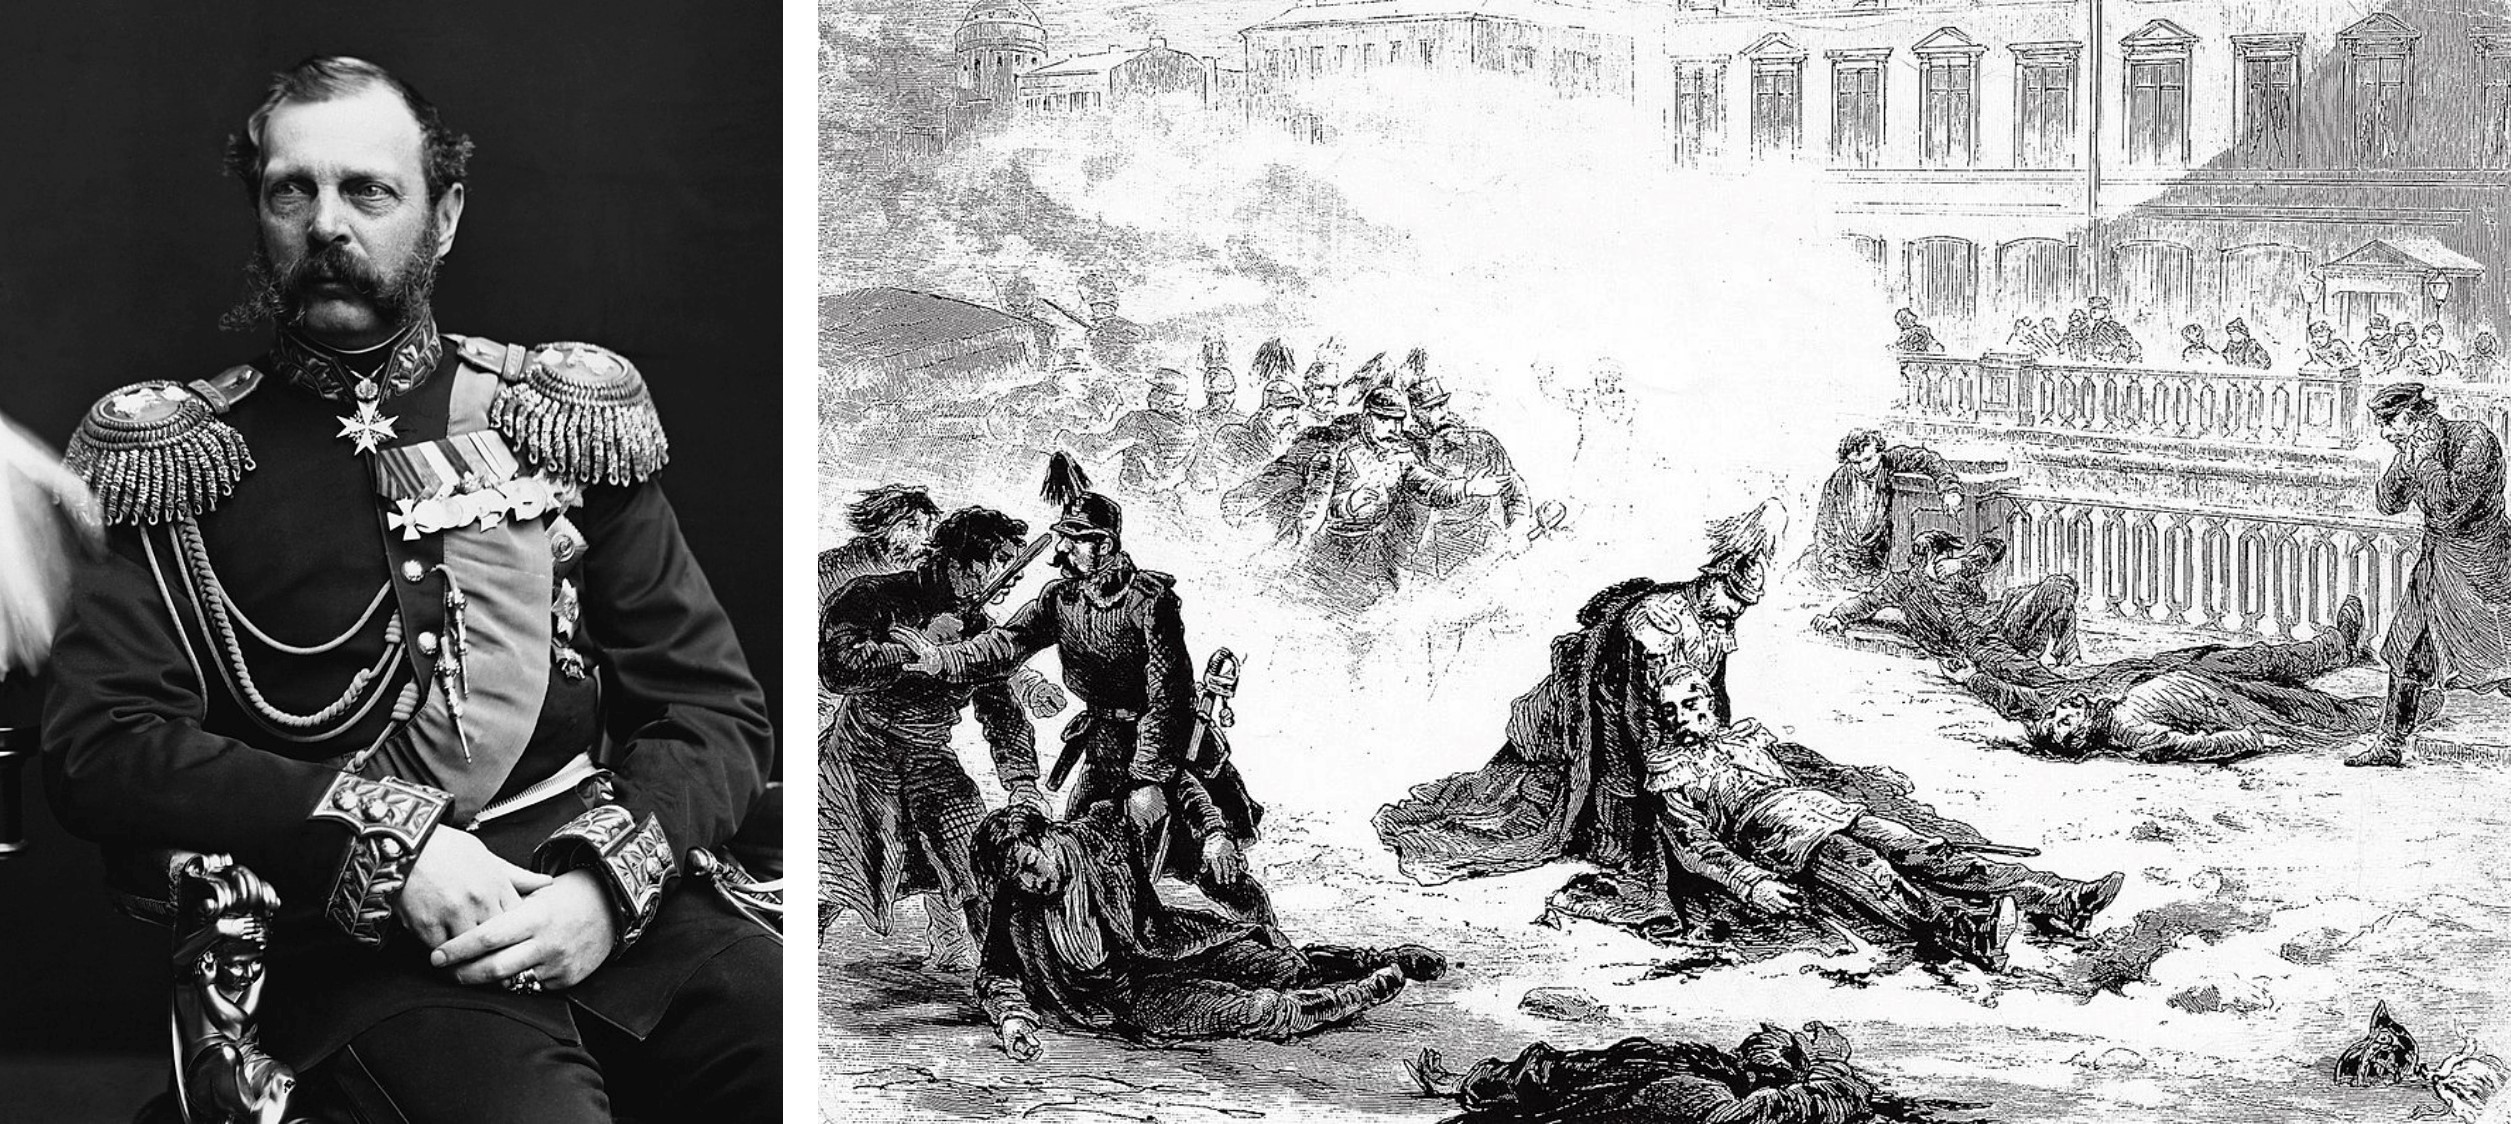 On the left, Alexander II. On the right, The Assassination of Alexander II.